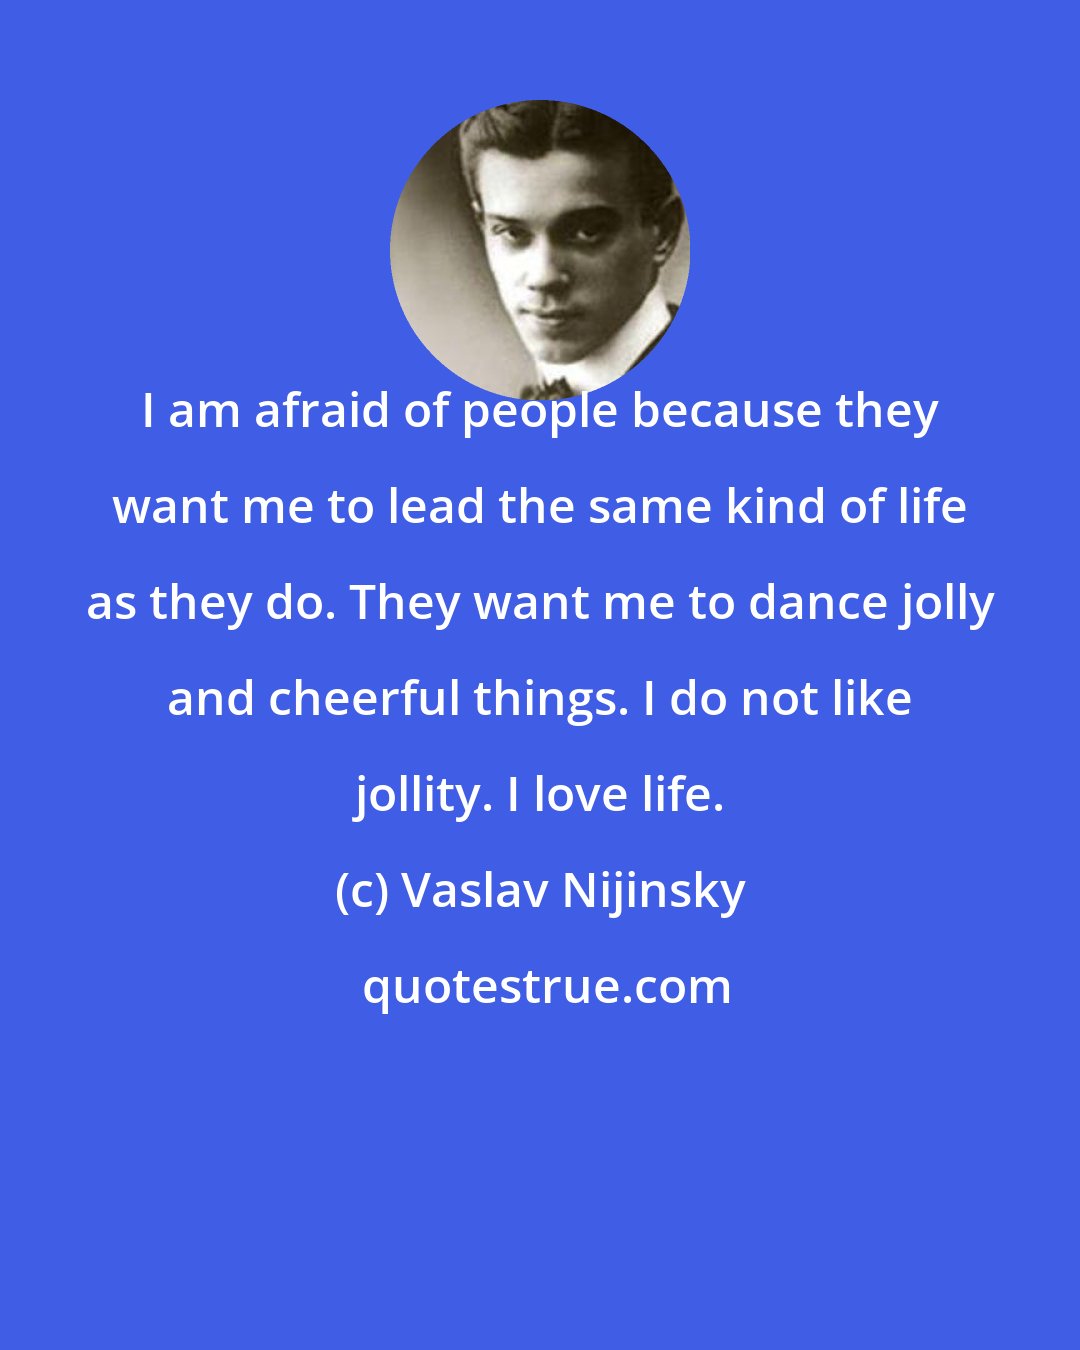 Vaslav Nijinsky: I am afraid of people because they want me to lead the same kind of life as they do. They want me to dance jolly and cheerful things. I do not like jollity. I love life.